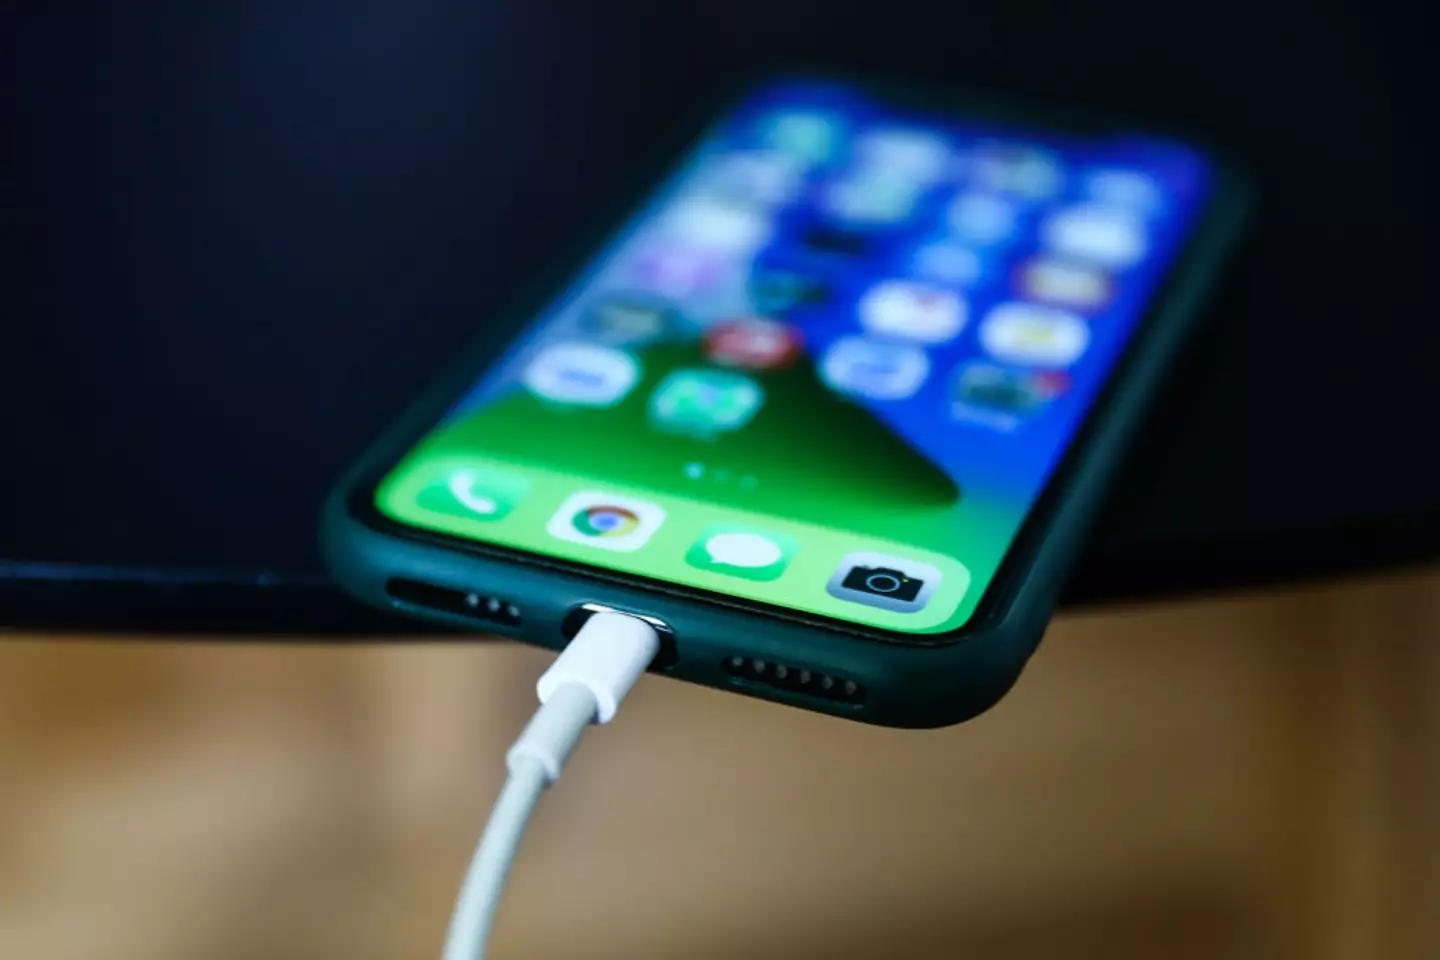 Apple has warned iPhone users that charging their phones overnight could result in injury (Getty Stock Images)